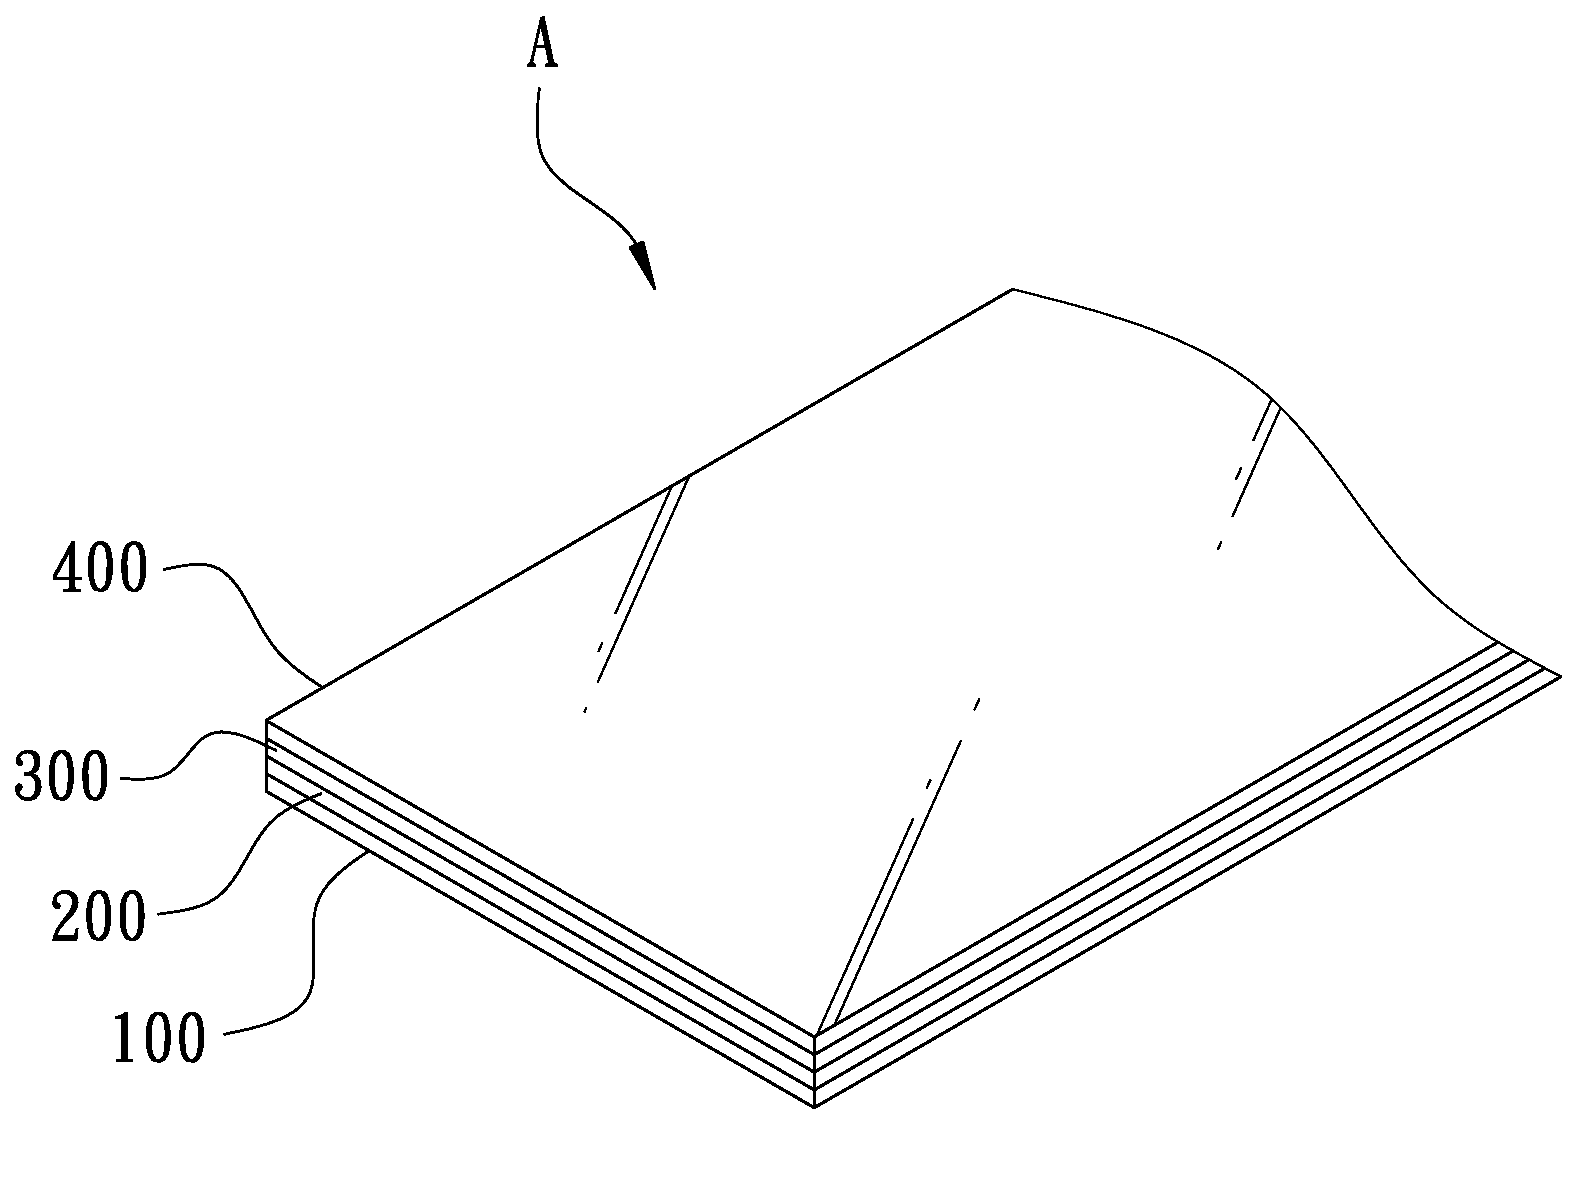 Method of manufacturing an adhesive material that can be printed and repeatedly stuck and torn